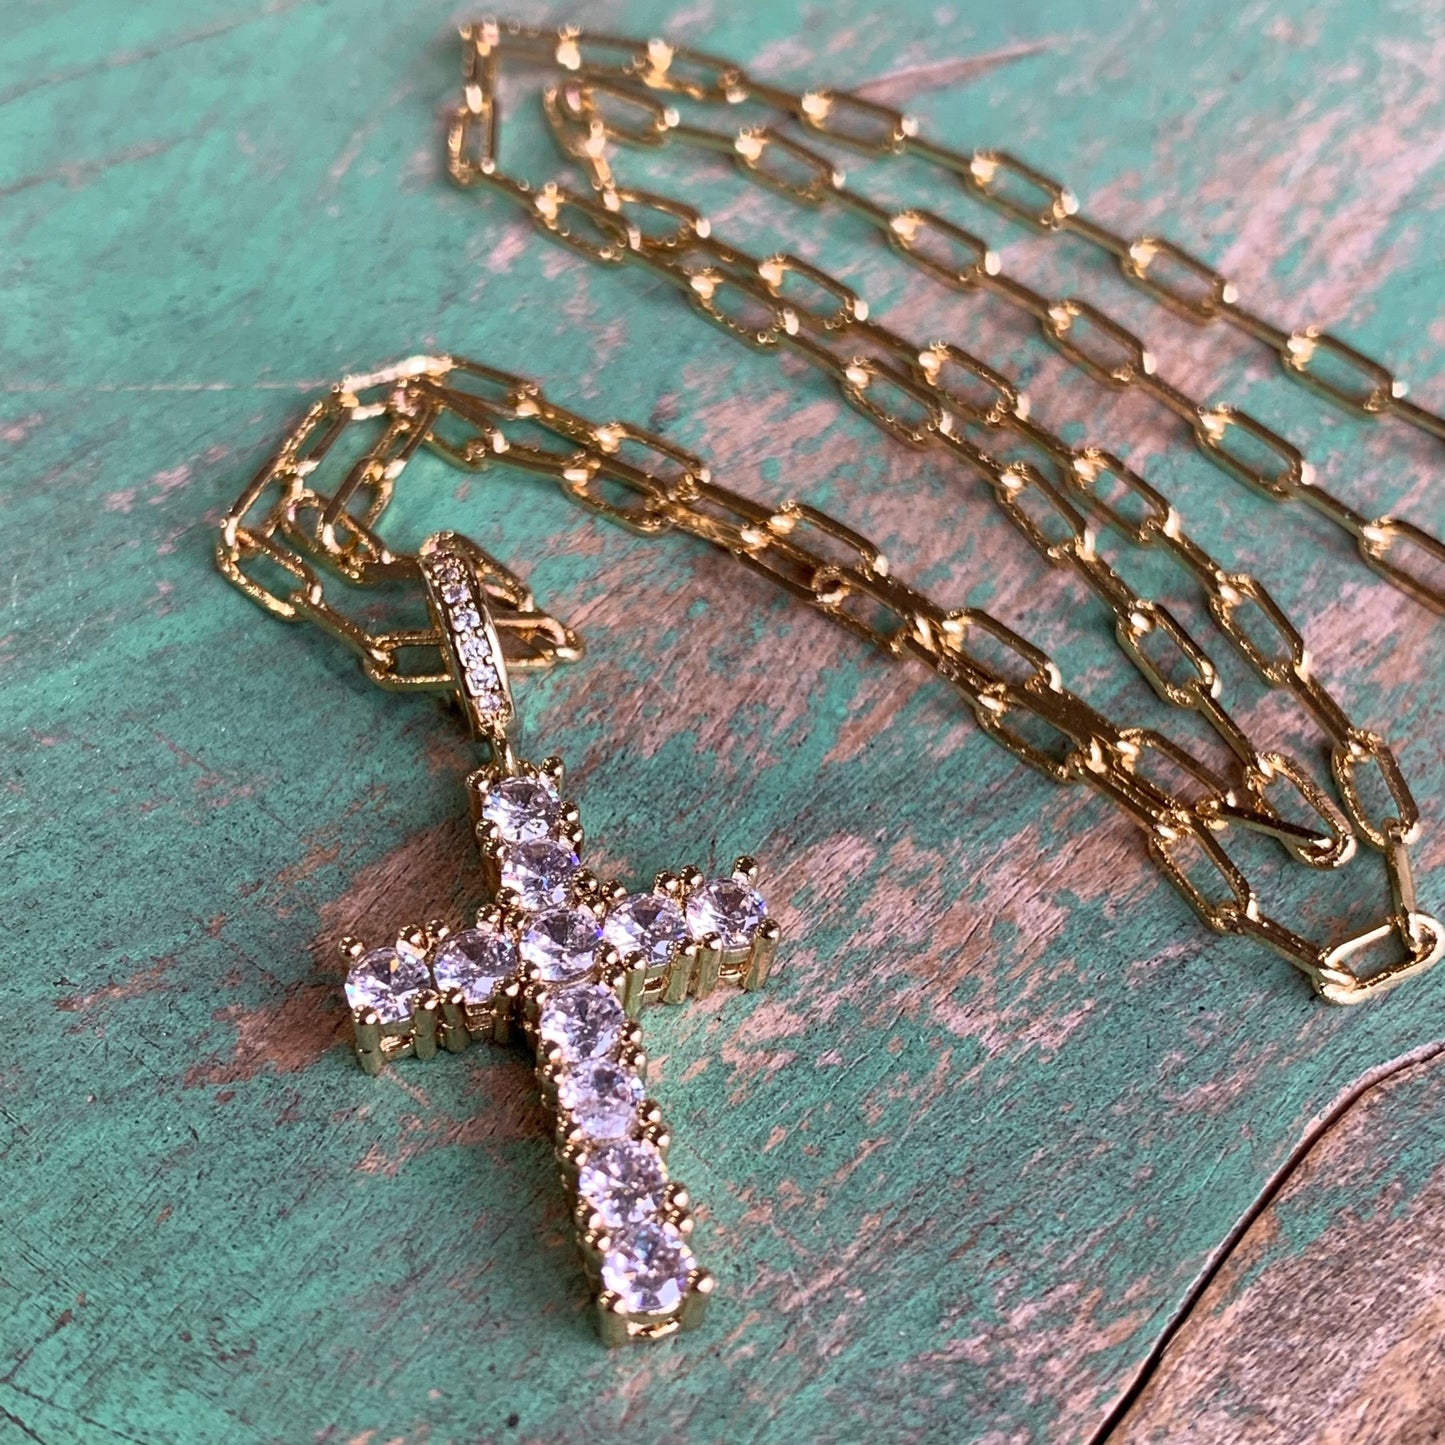 Our Radiant Redeemer Necklace